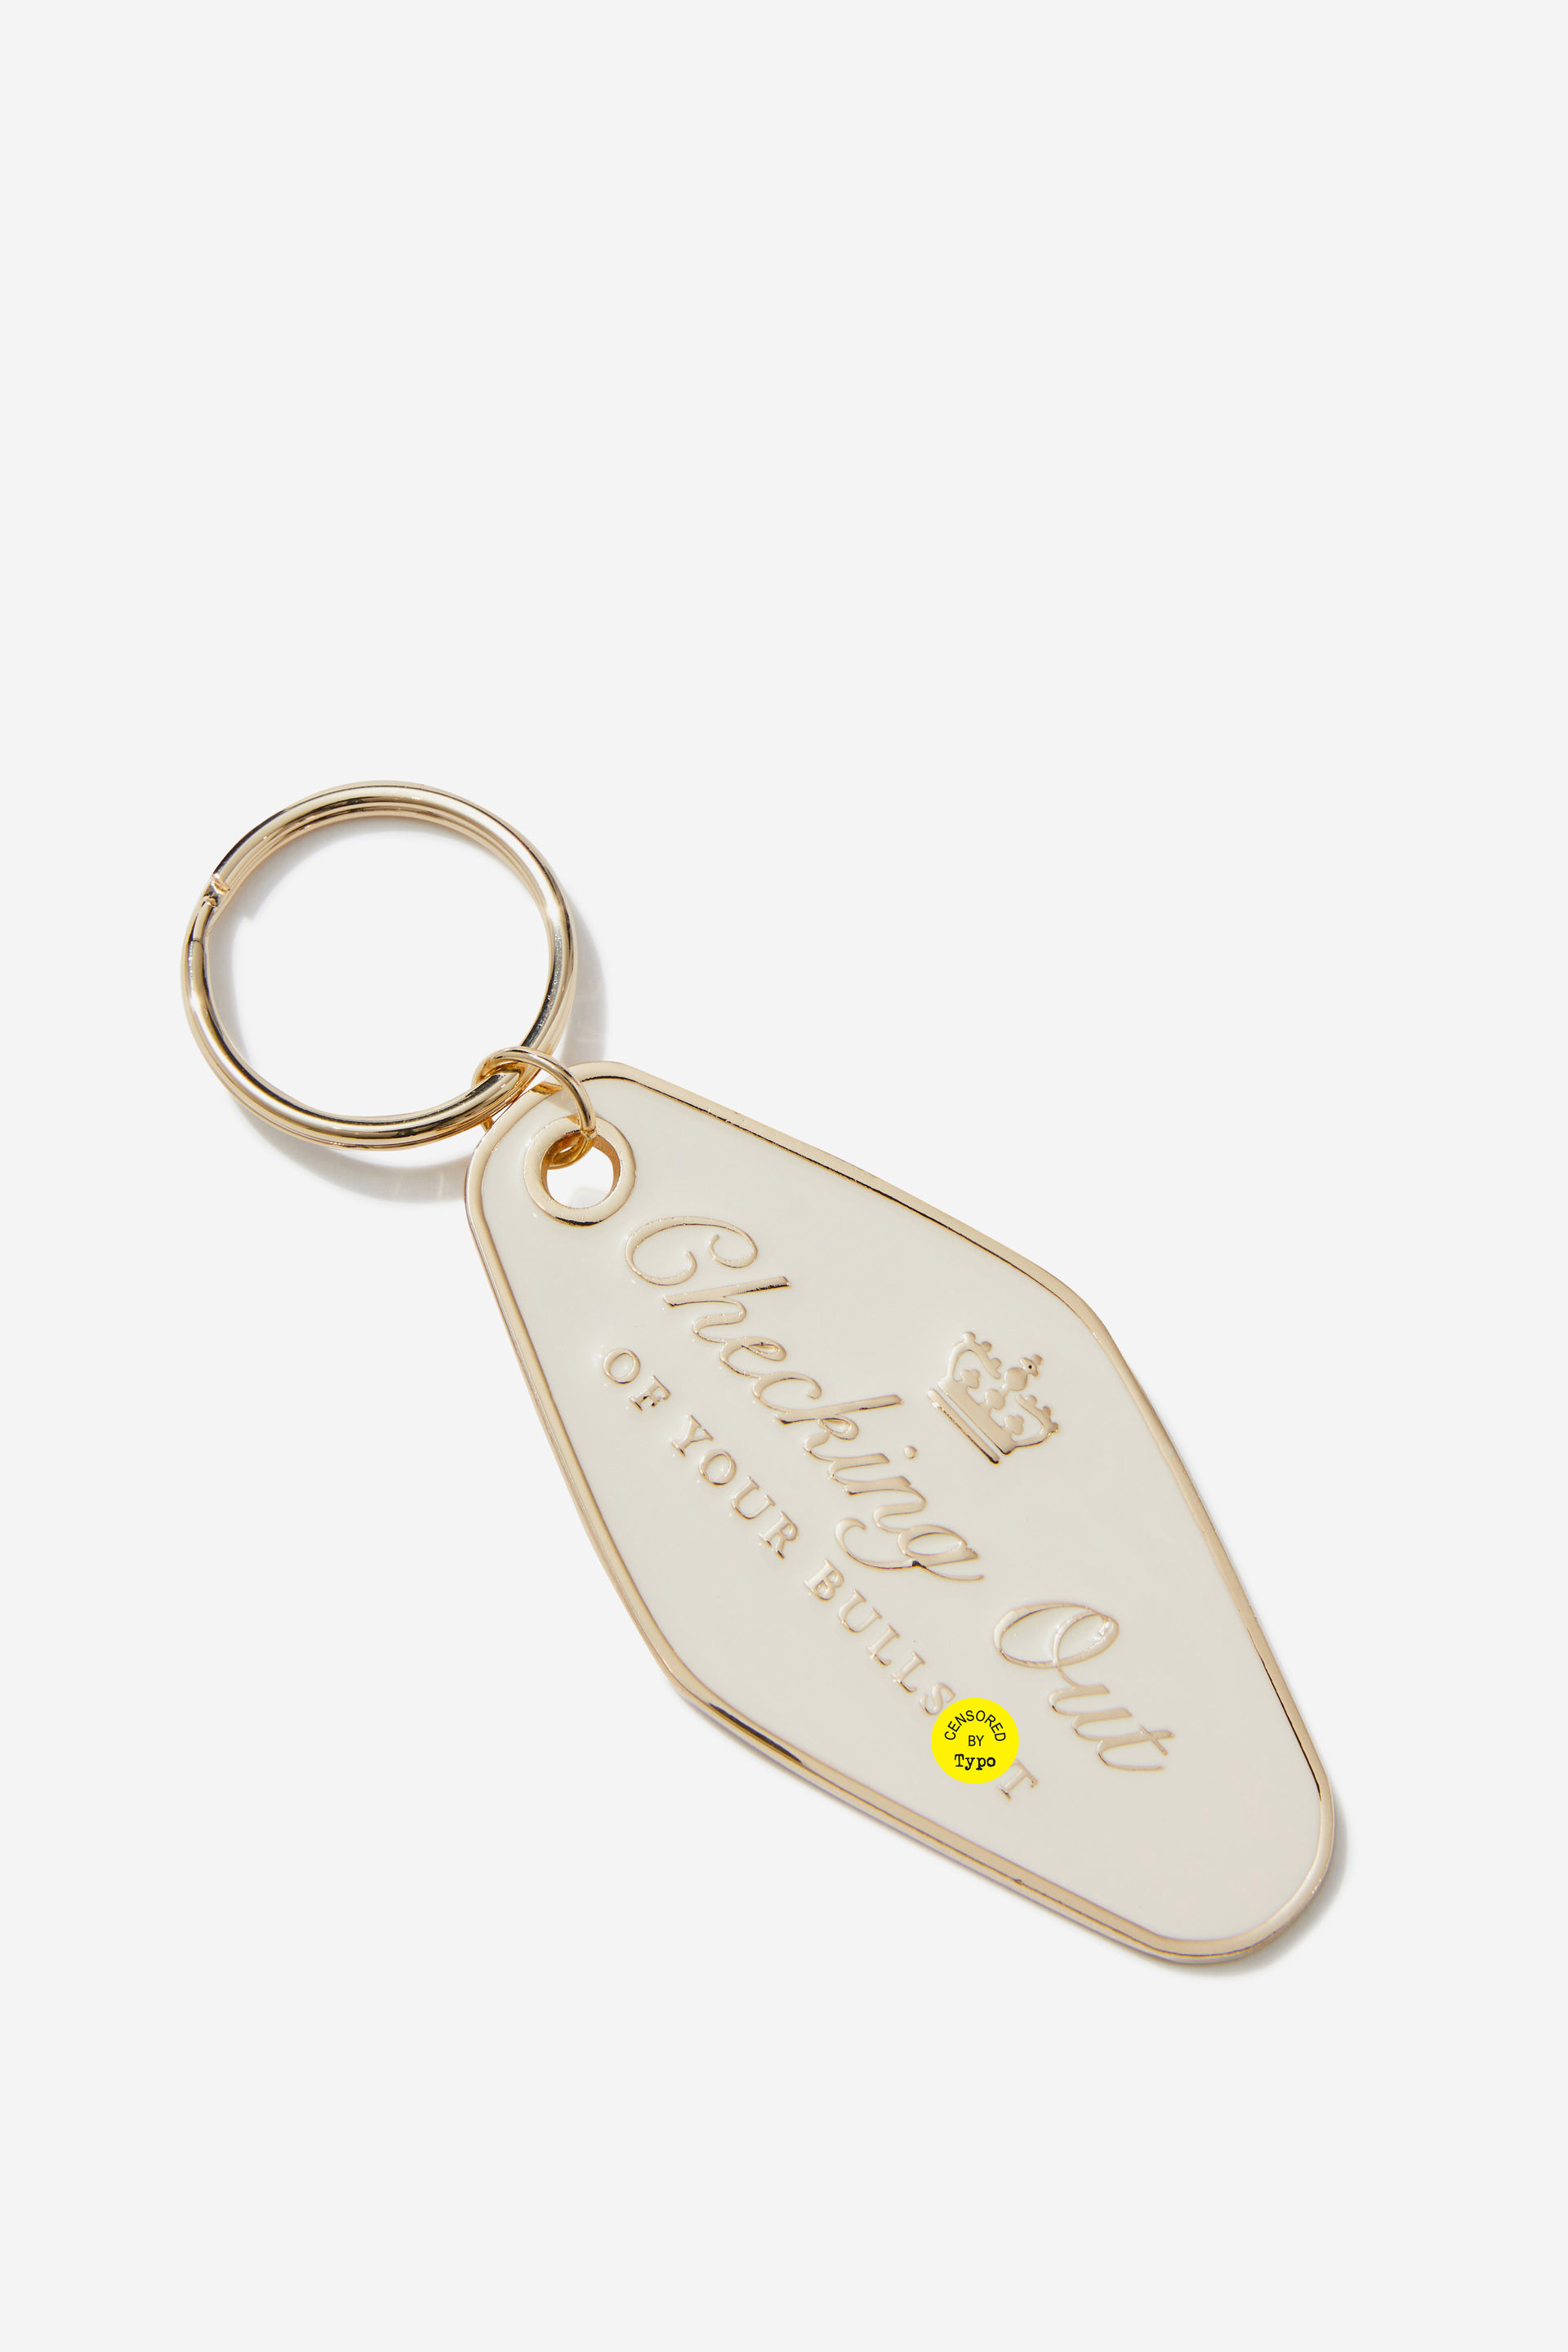 Typo - Luggage Keyring - Checking out!